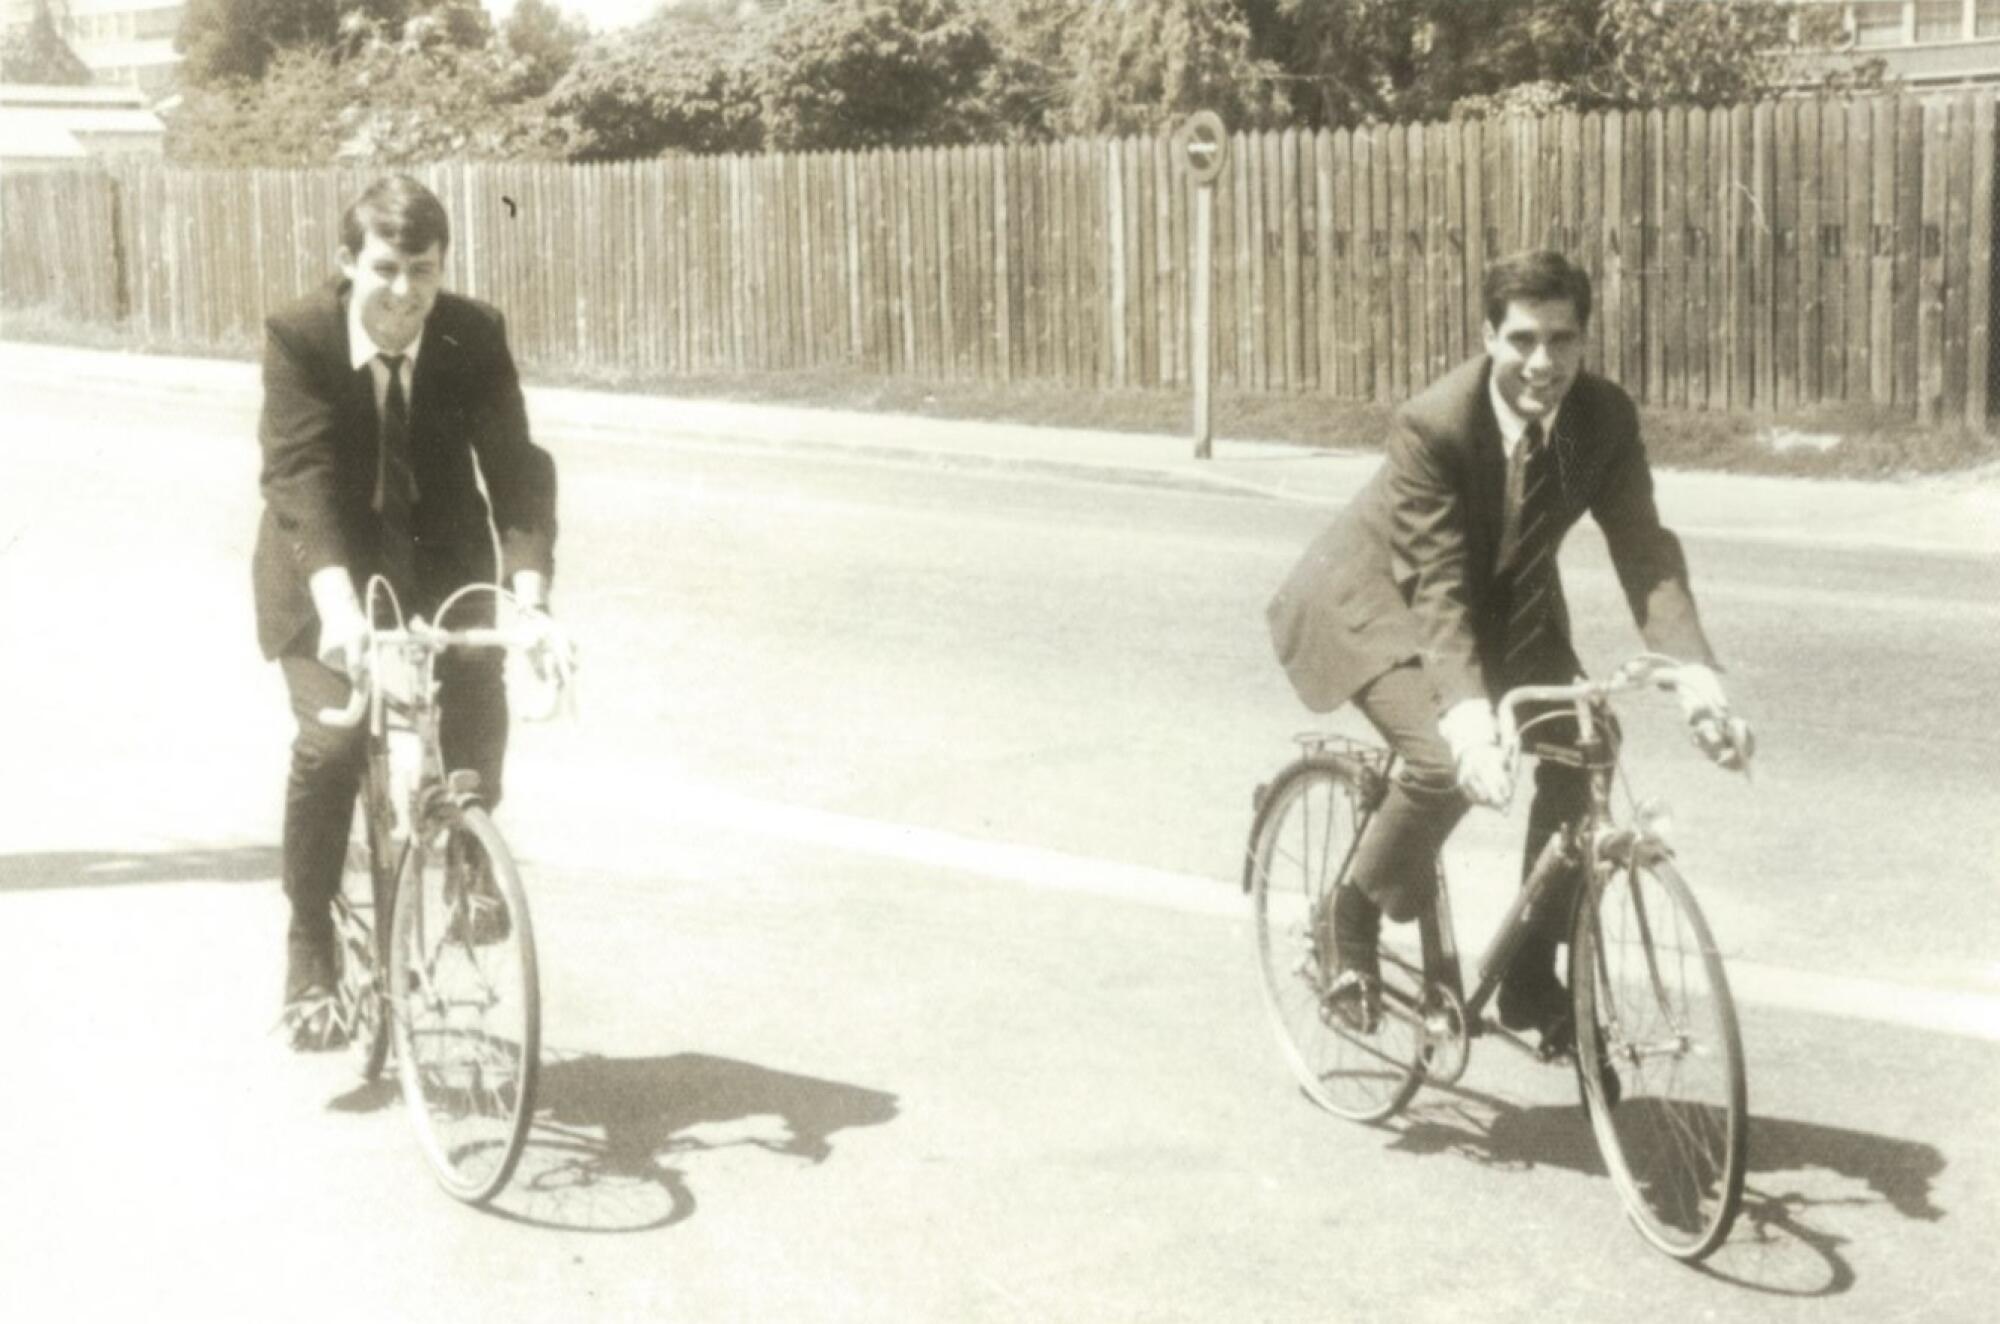 Romney, right, on a bike in France wearing a suit and tie.